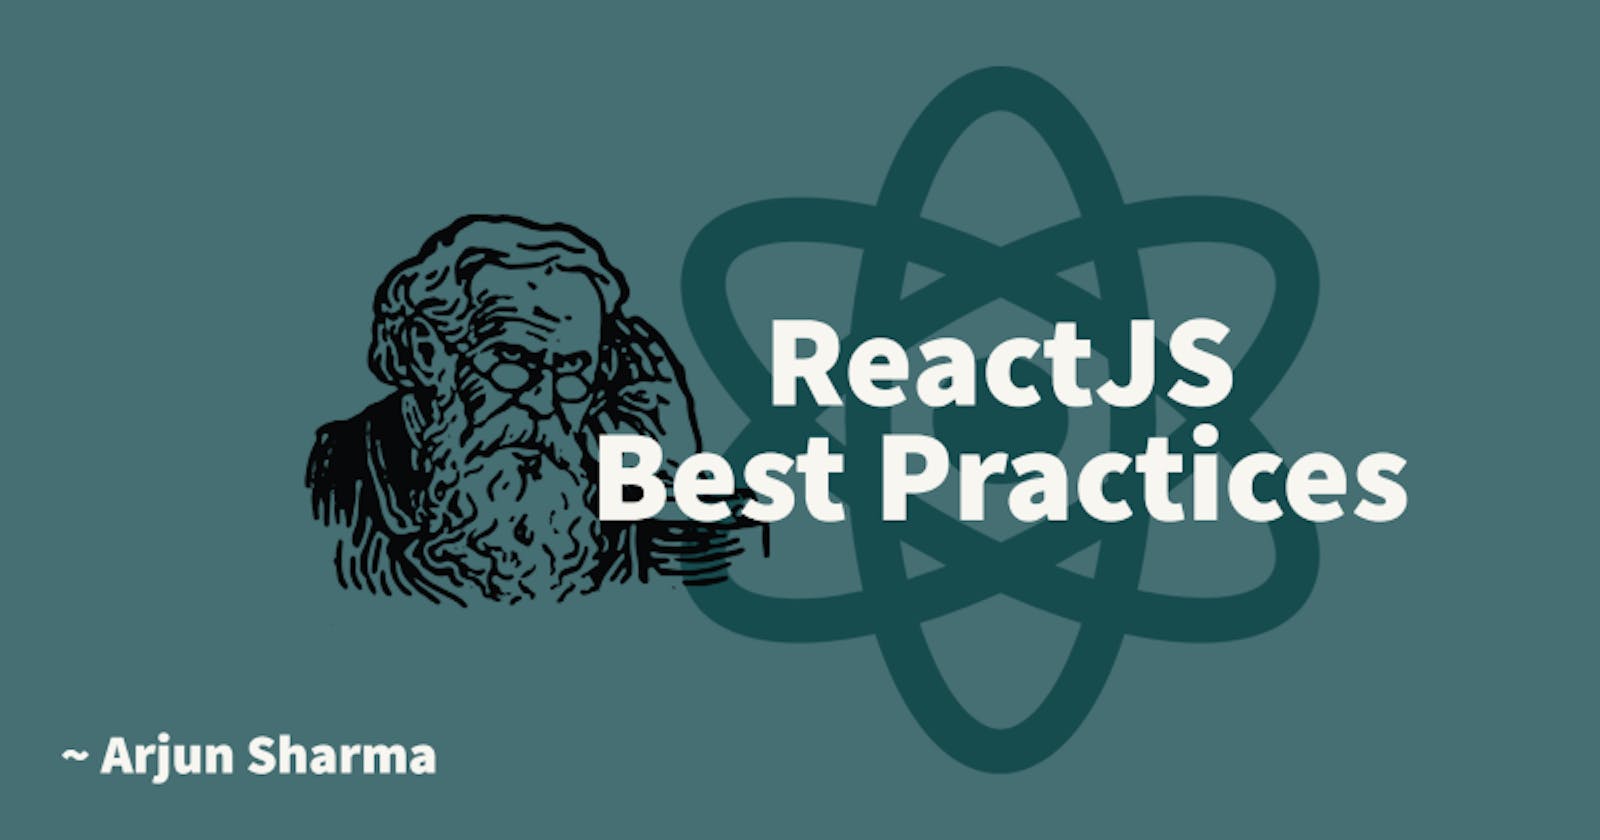 ReactJS Best Practices: Tips and Tricks for Writing Better Code